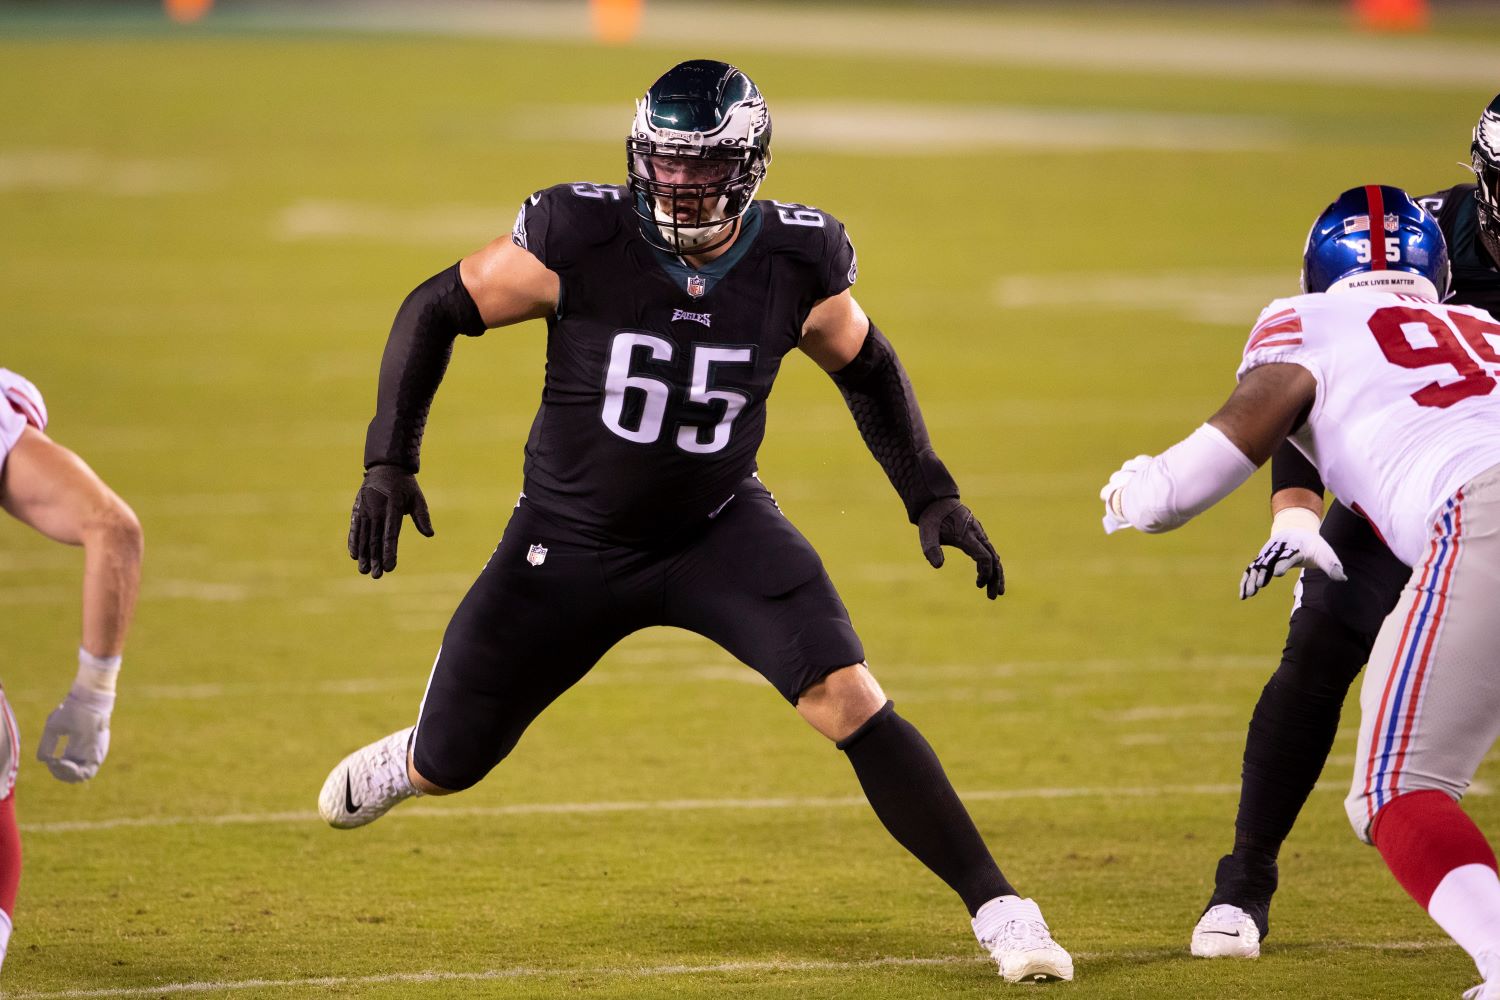 The Philadelphia Eagles just dodged a massive bullet with Lane Johnson, who won't miss as much time as expected after spraining his MCL.